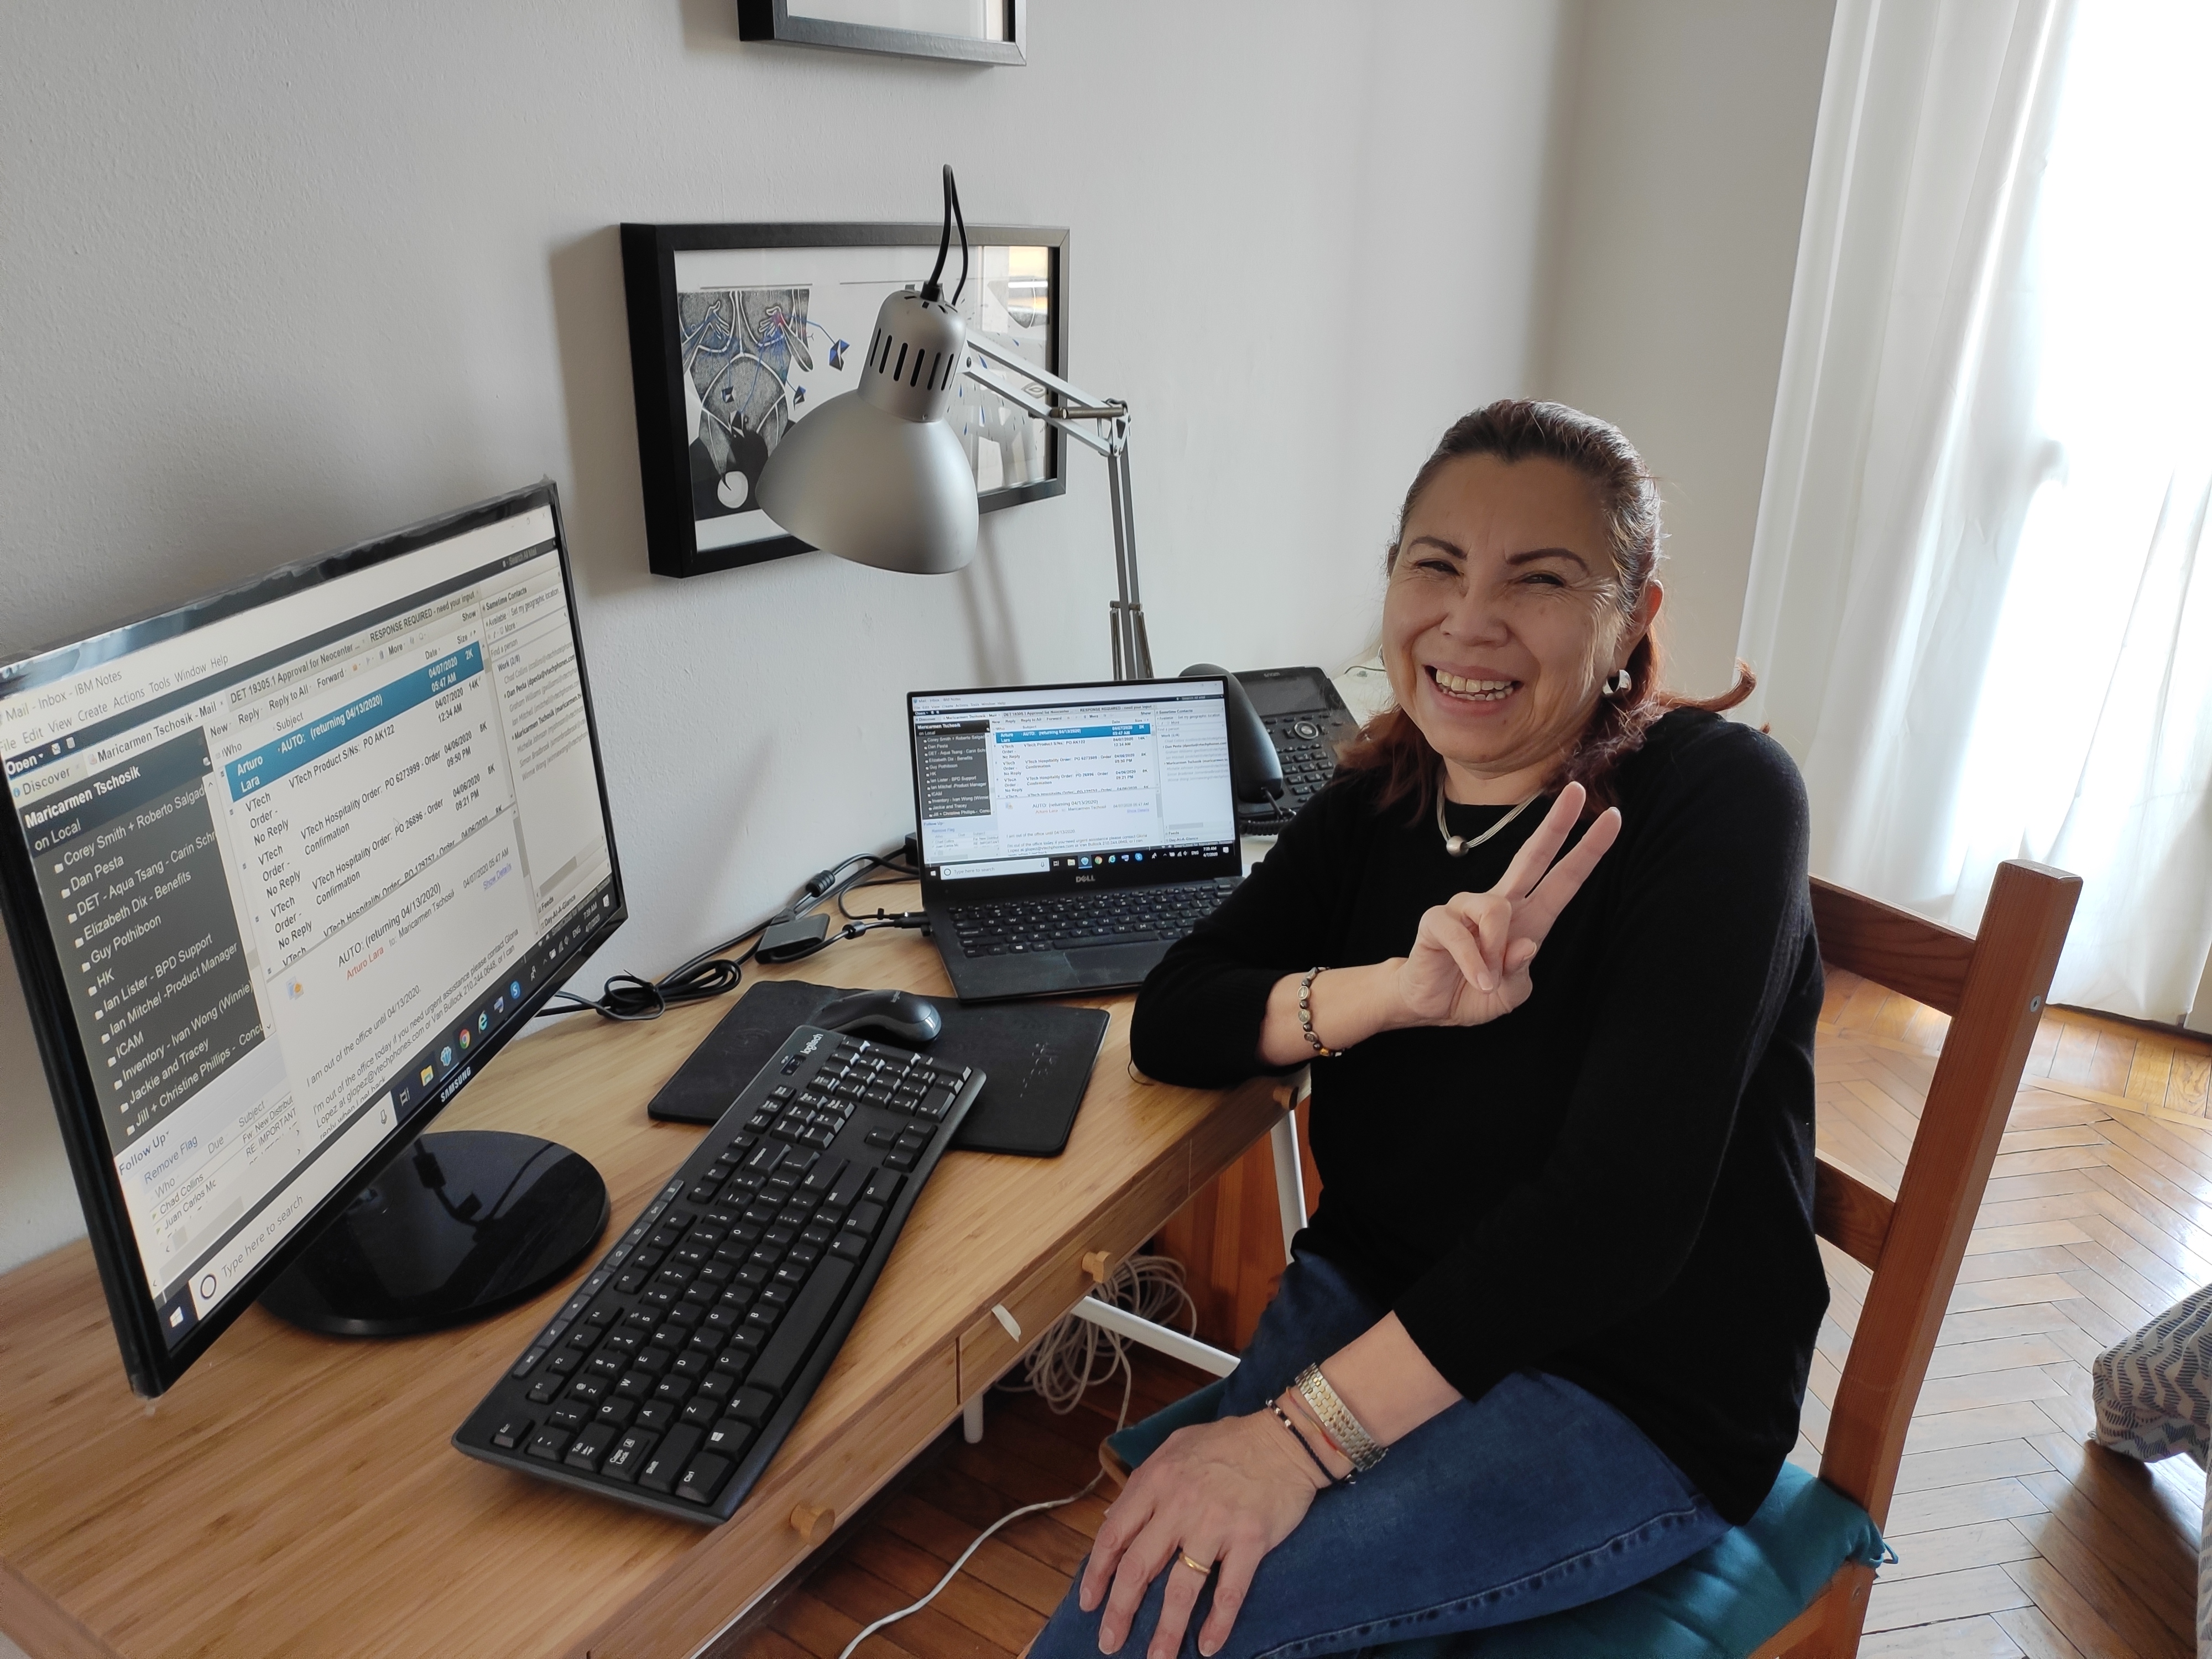 Snom sales team shares their work from home offices